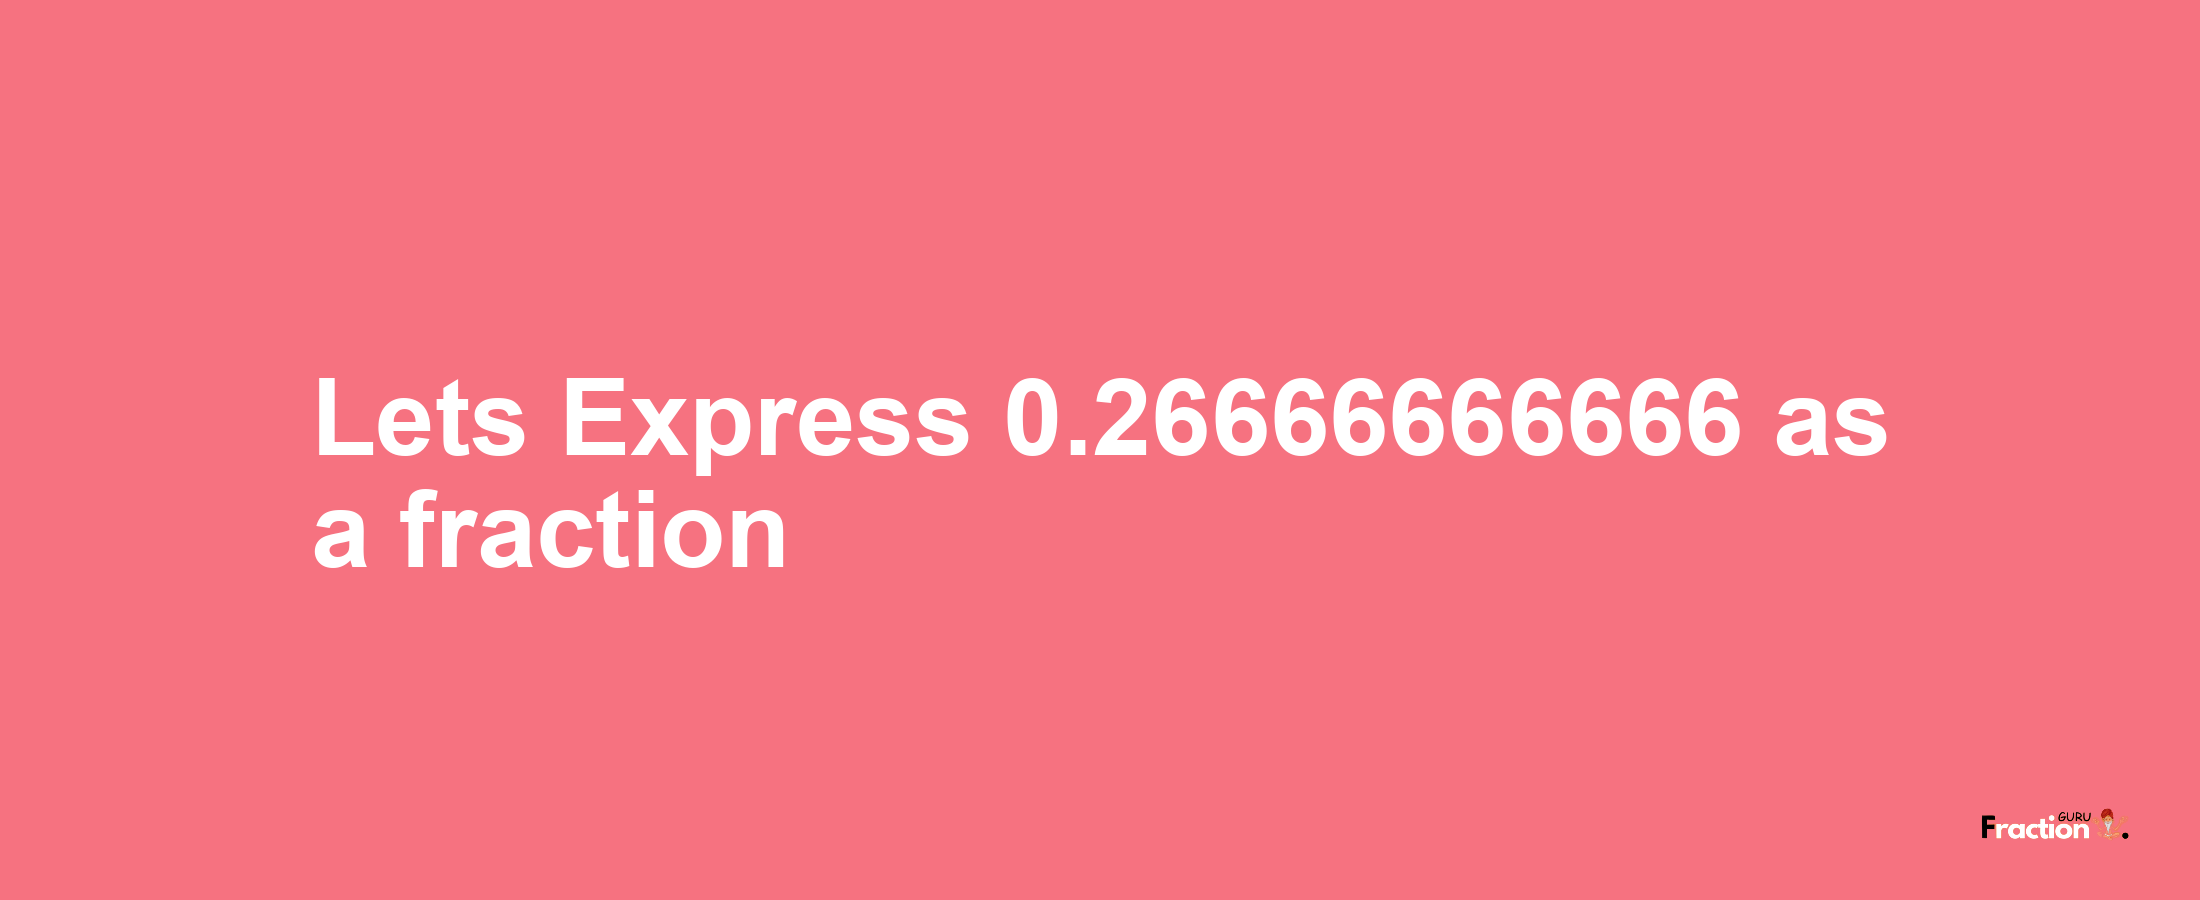 Lets Express 0.26666666666 as afraction